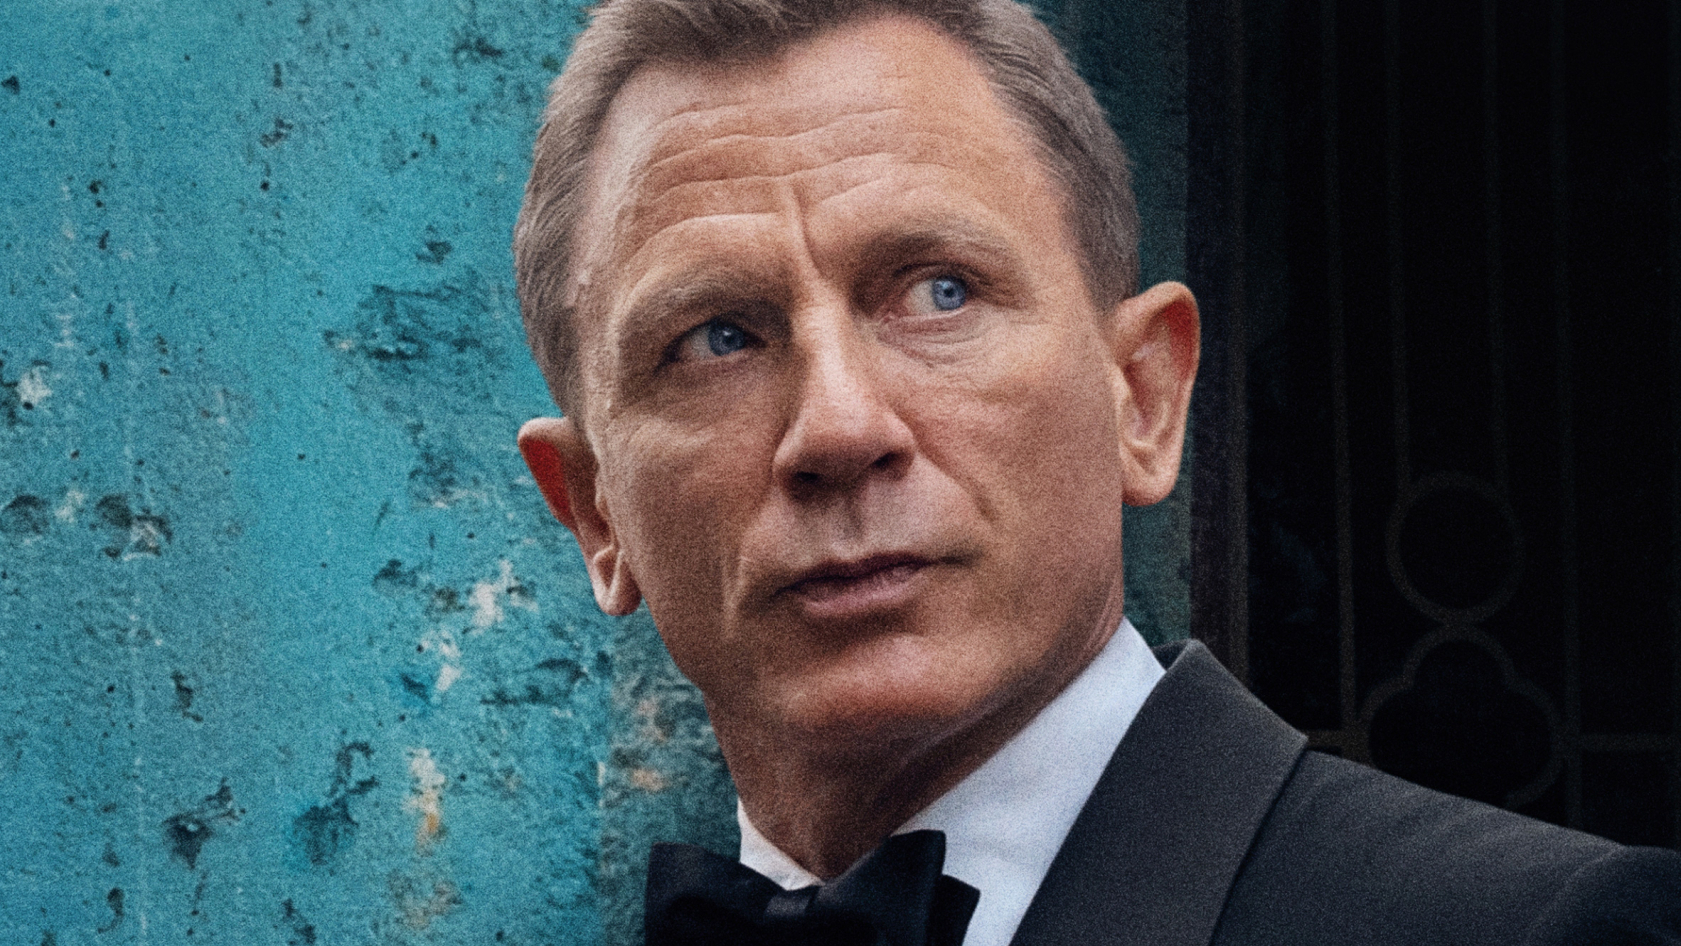 Daniel Craig Gives 'Zoolander' Vibes In Taika Waititi-Directed Ad For Belvedere  Vodka